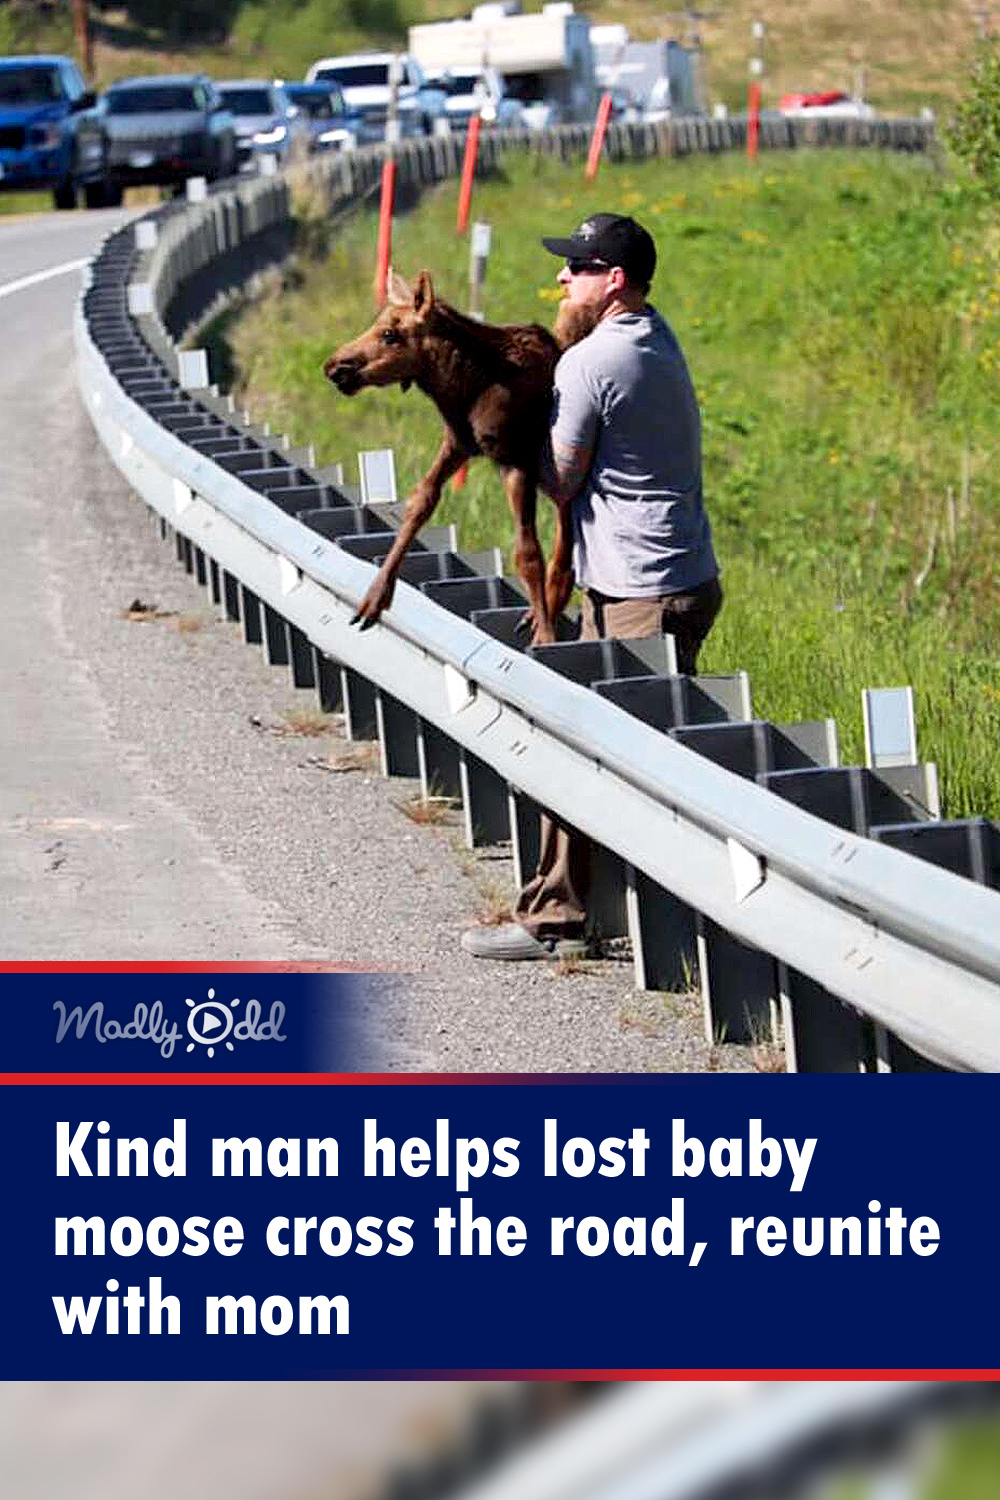 Kind man helps lost baby moose cross the road, reunite with mom